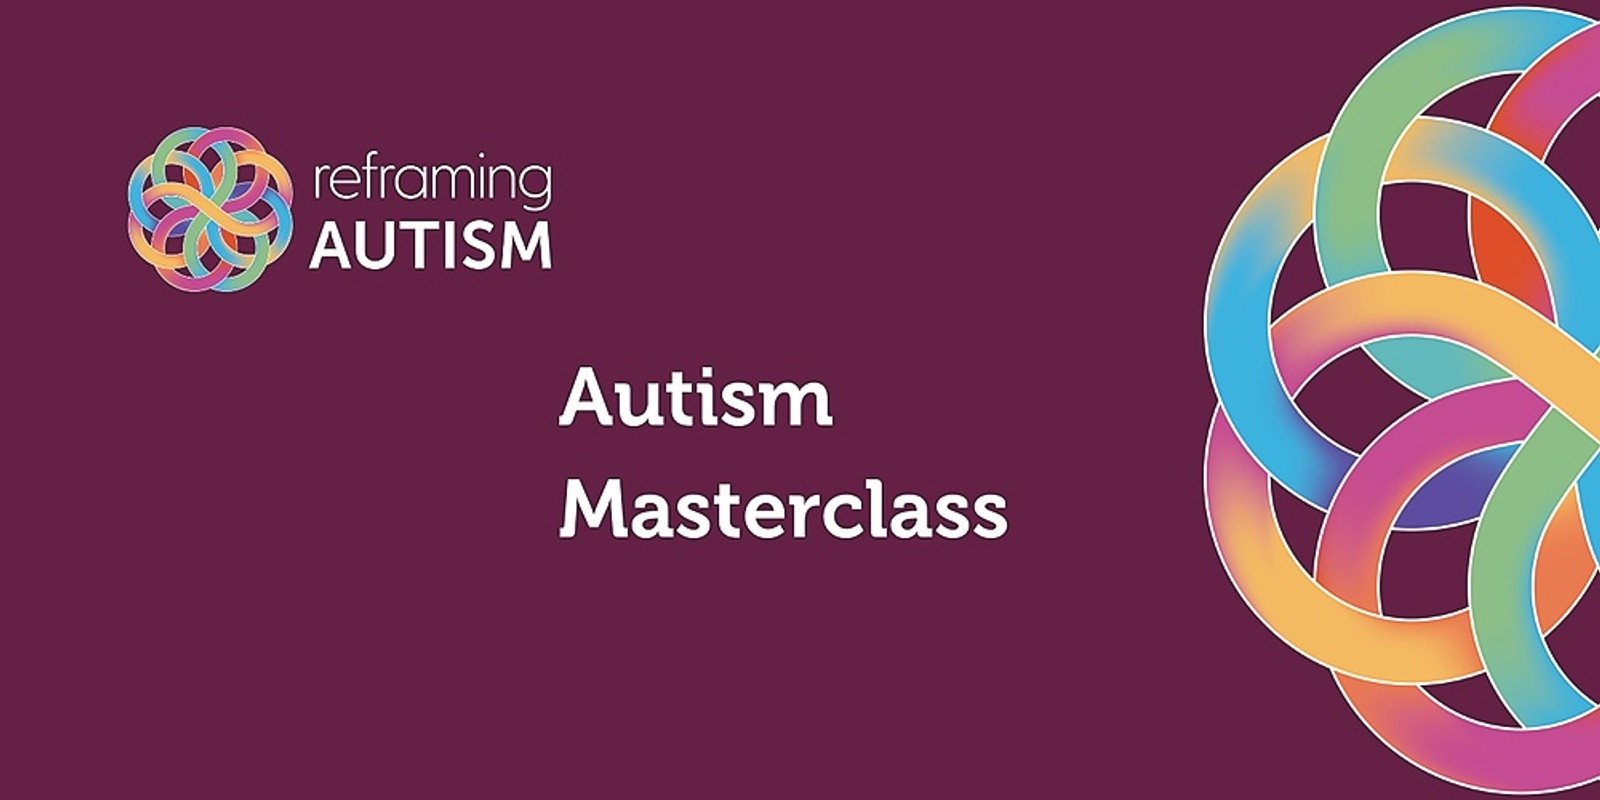 Masterclass: Supporting Autistic People with Eating Disorders (Including ARFID) with Annie Crowe